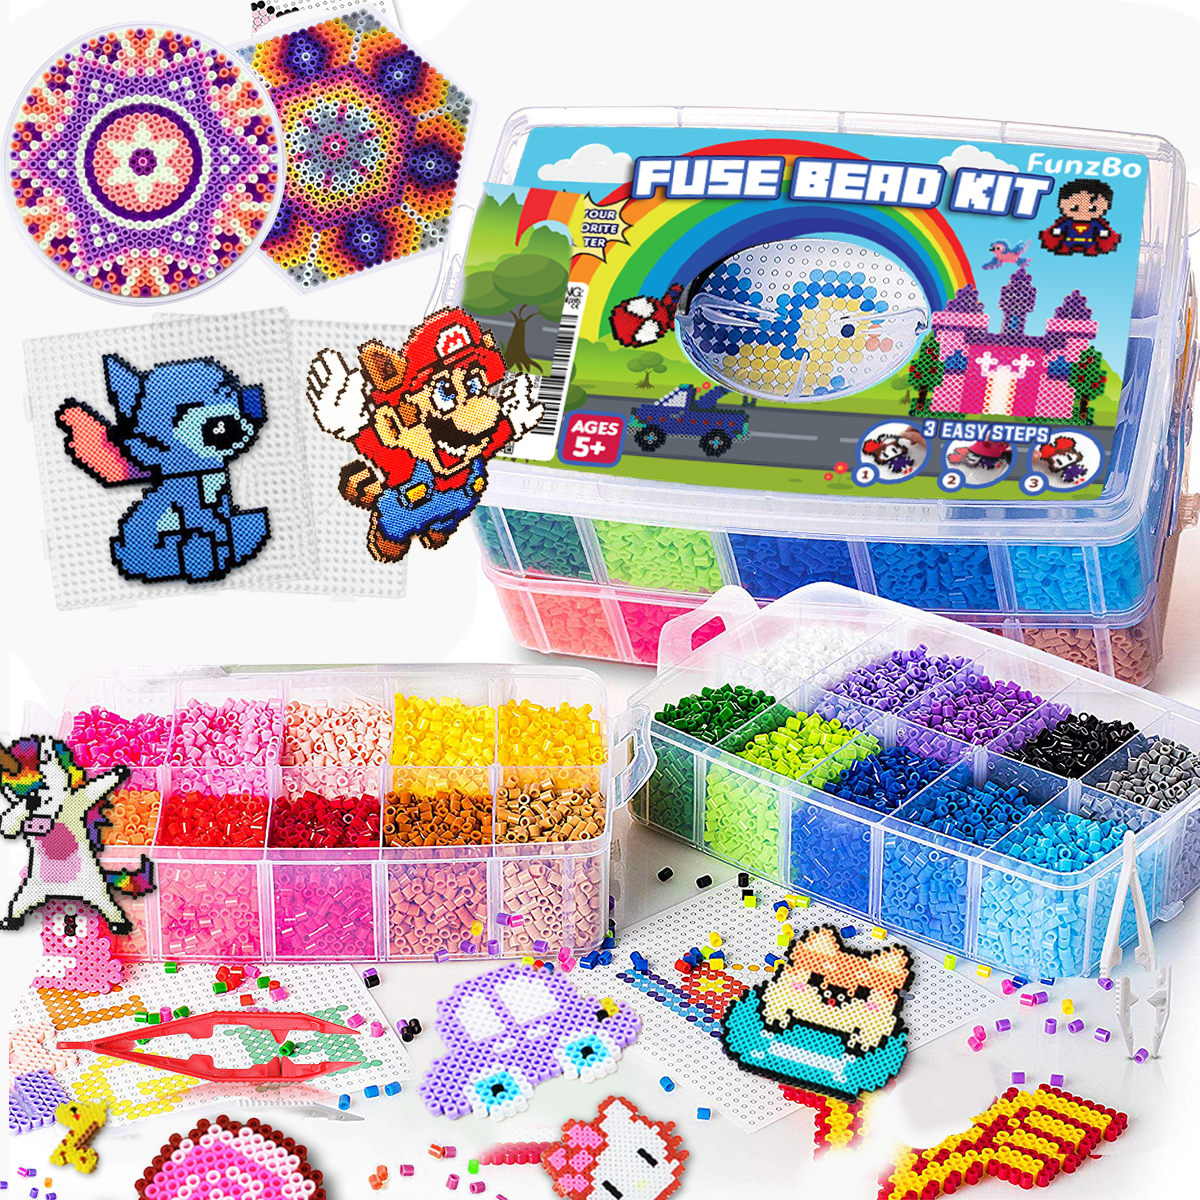  FUNZBO Arts and Crafts Supplies for Kids - Kids Craft